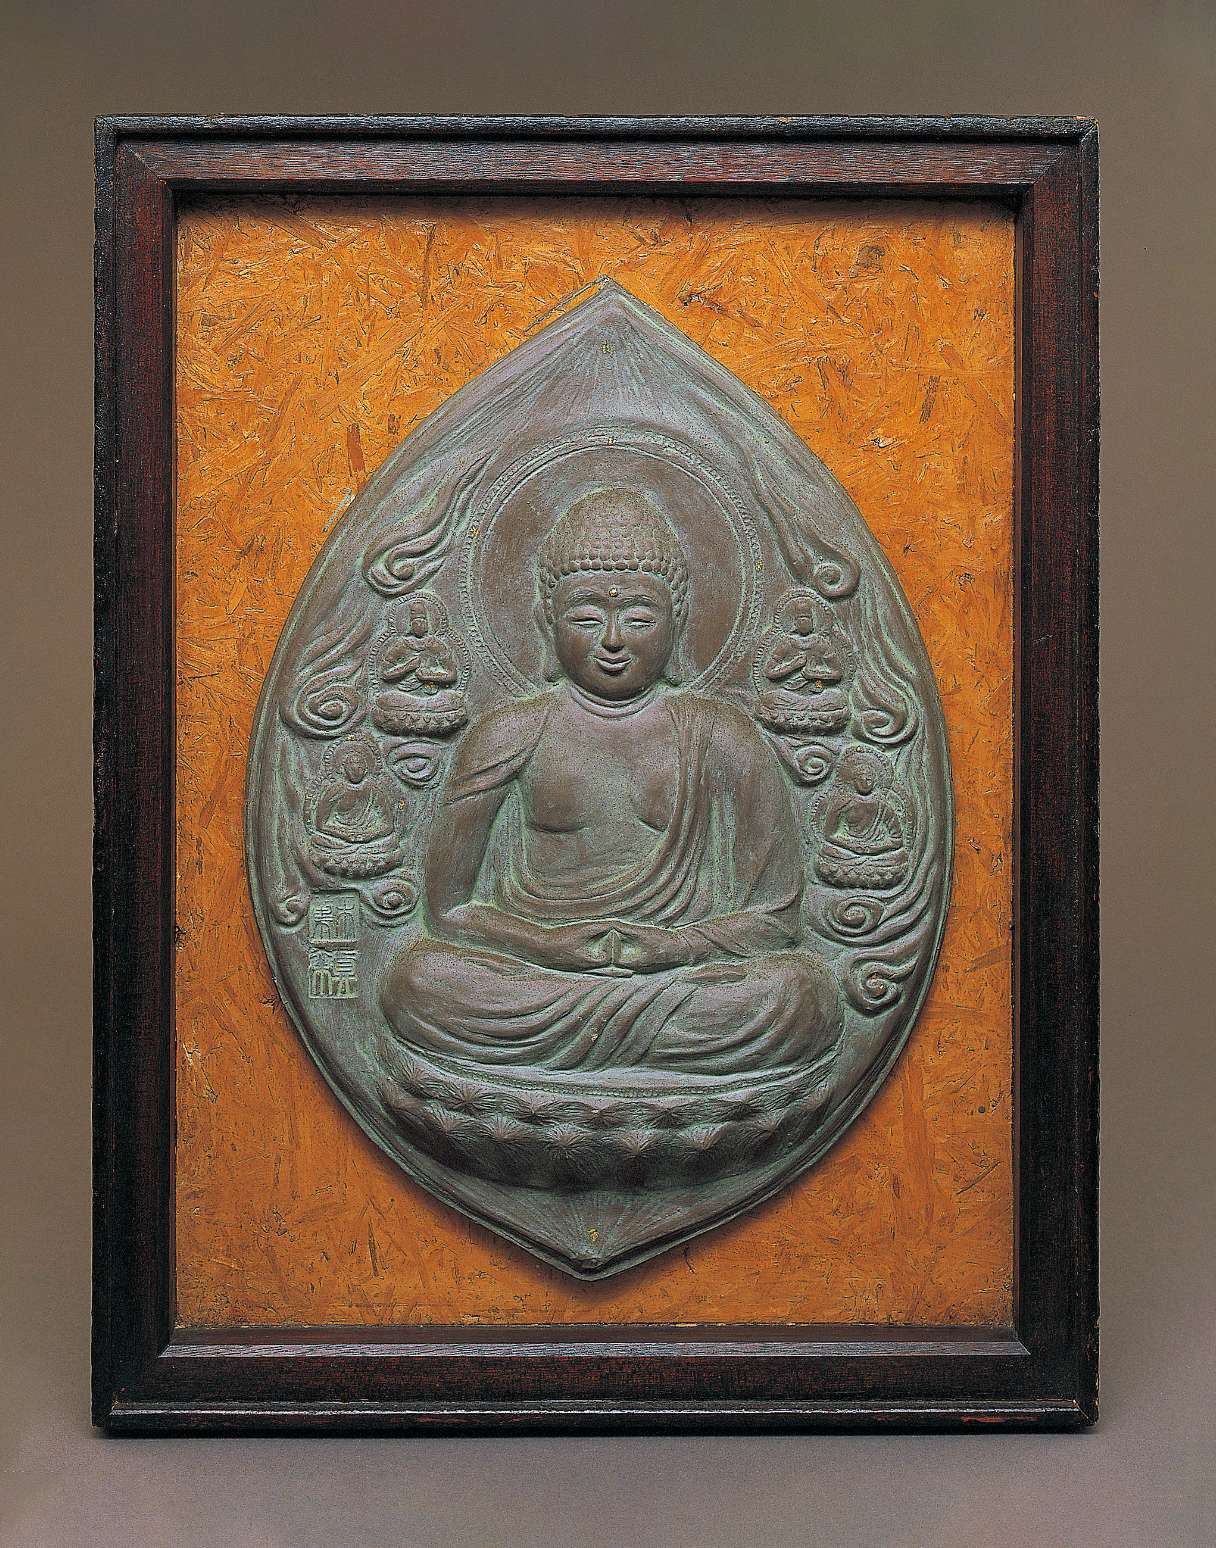 An upright almond-shaped grayish relief of a buddha sitting cross-legged atop a lotus seat with his hands in meditation posture, surrounded by clouds and four smaller buddhas.